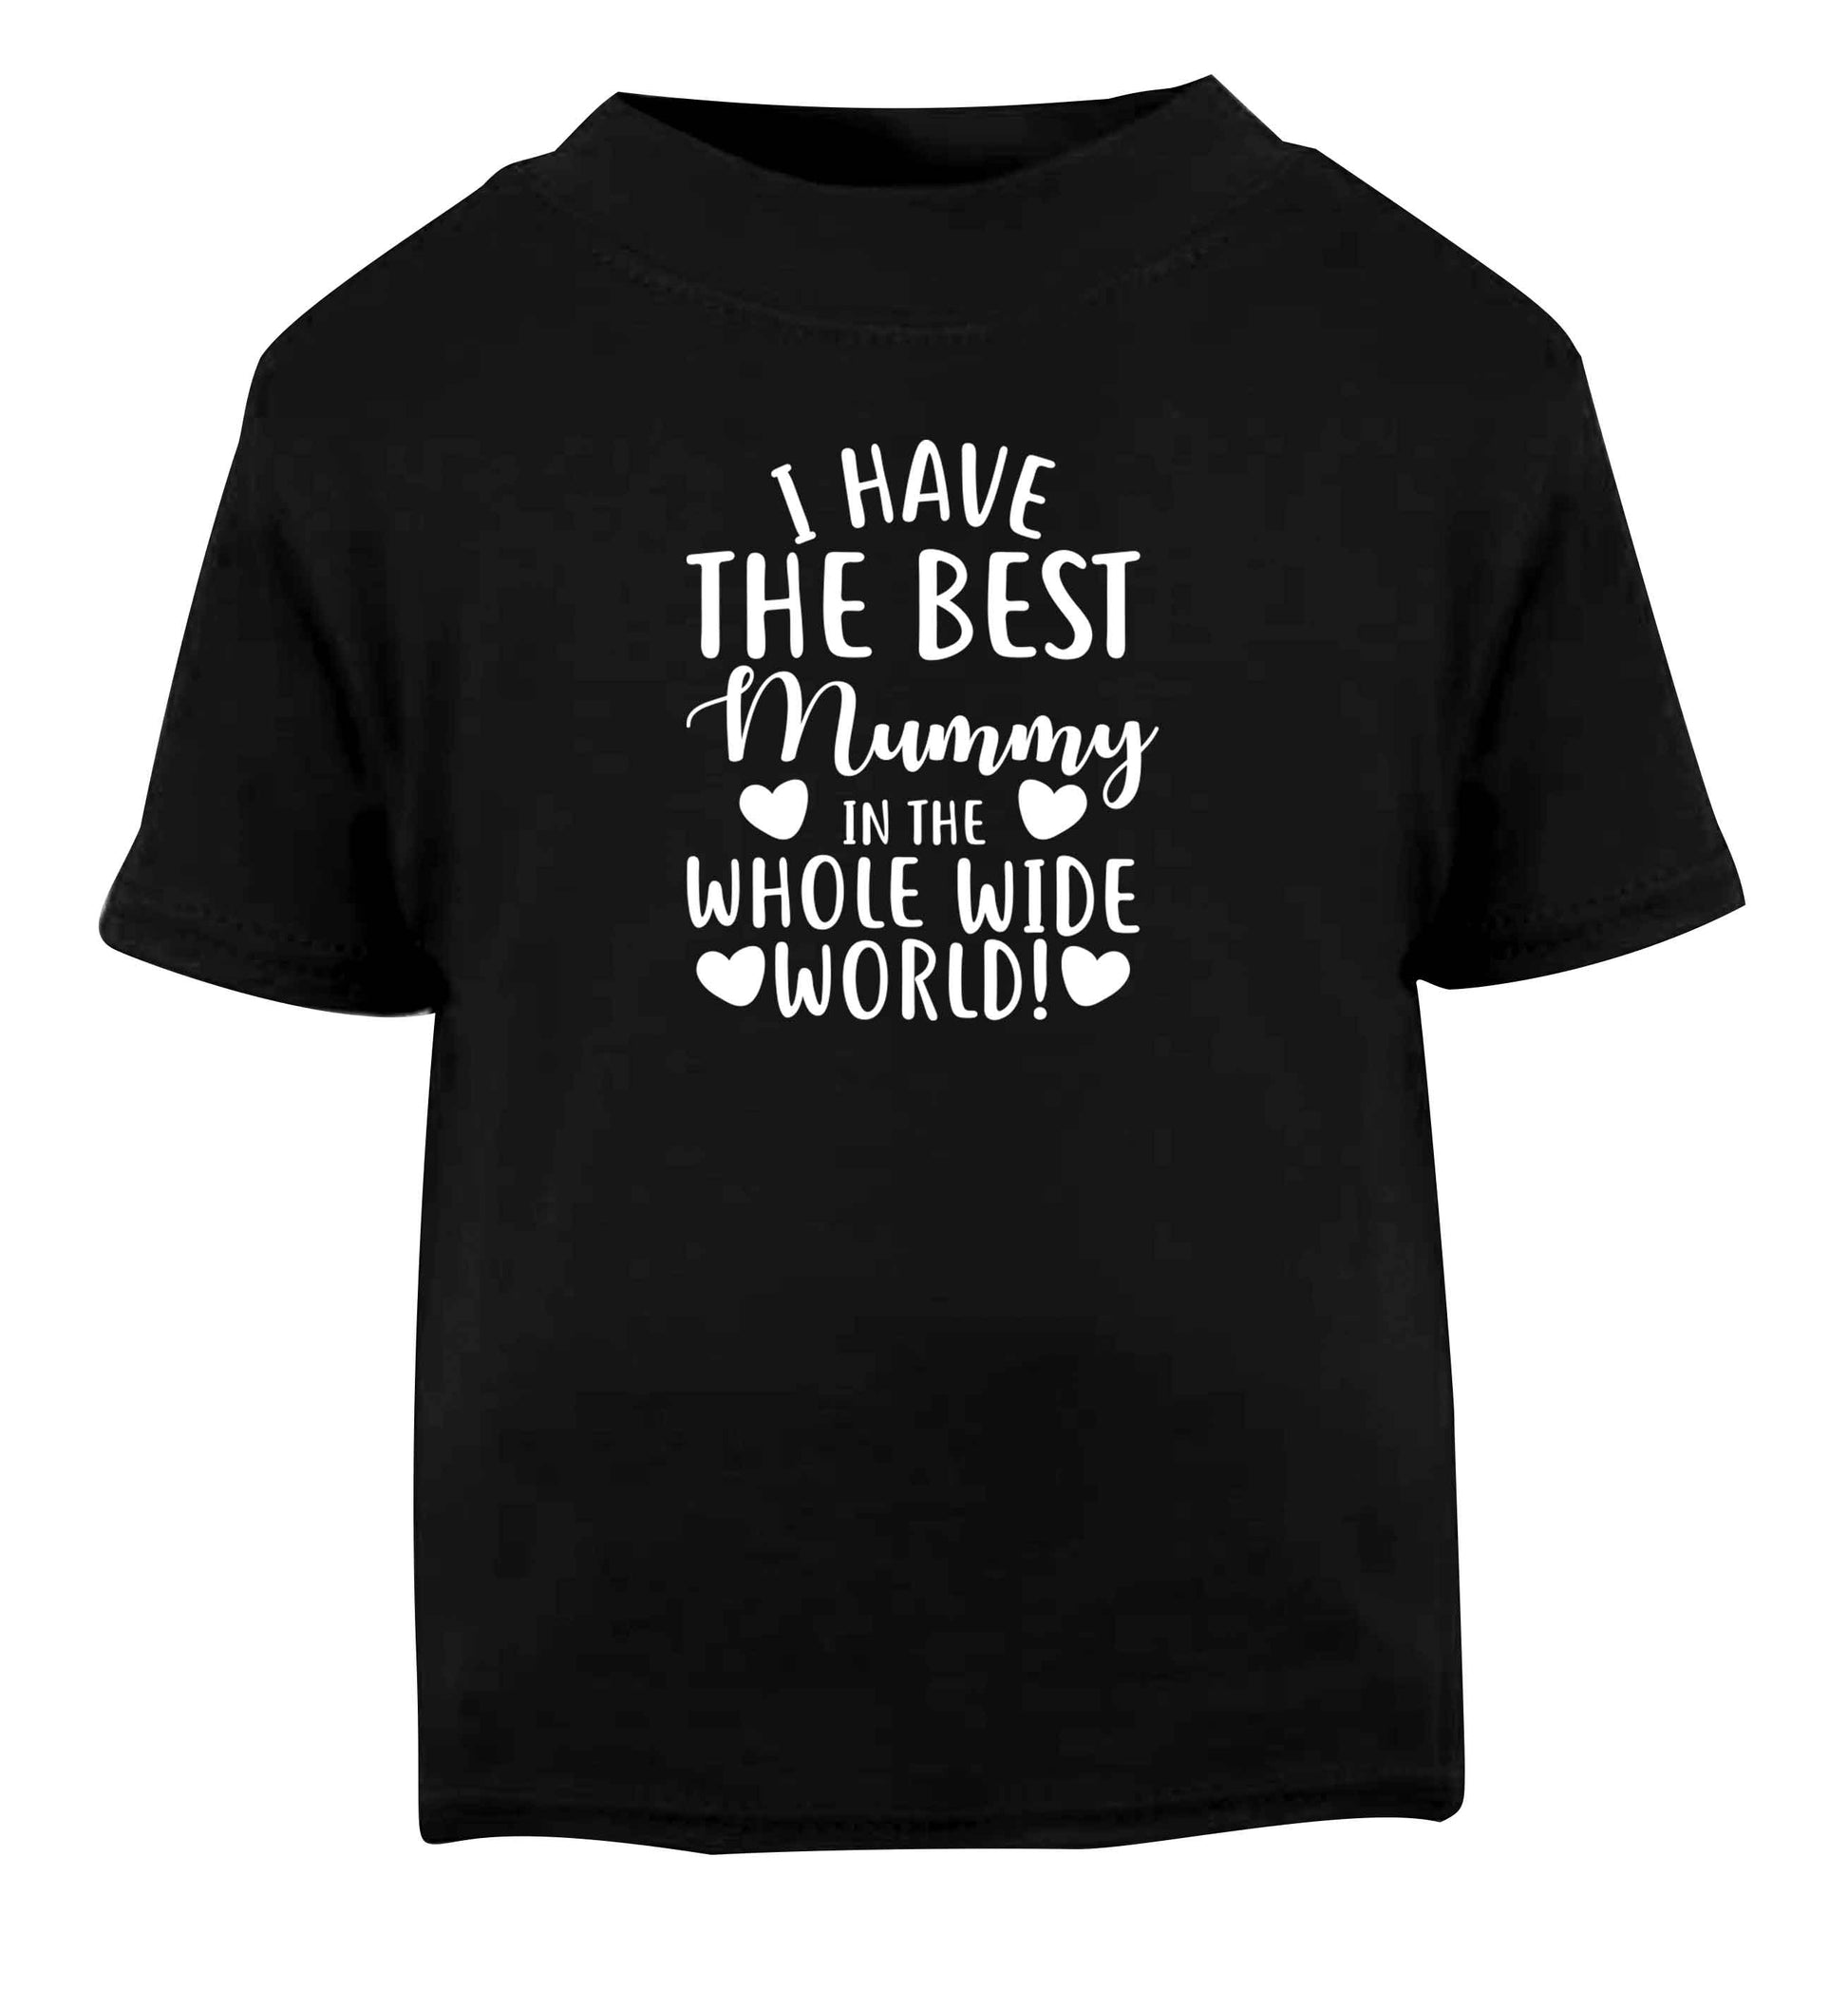 I have the best mummy in the whole wide world Black baby toddler Tshirt 2 years